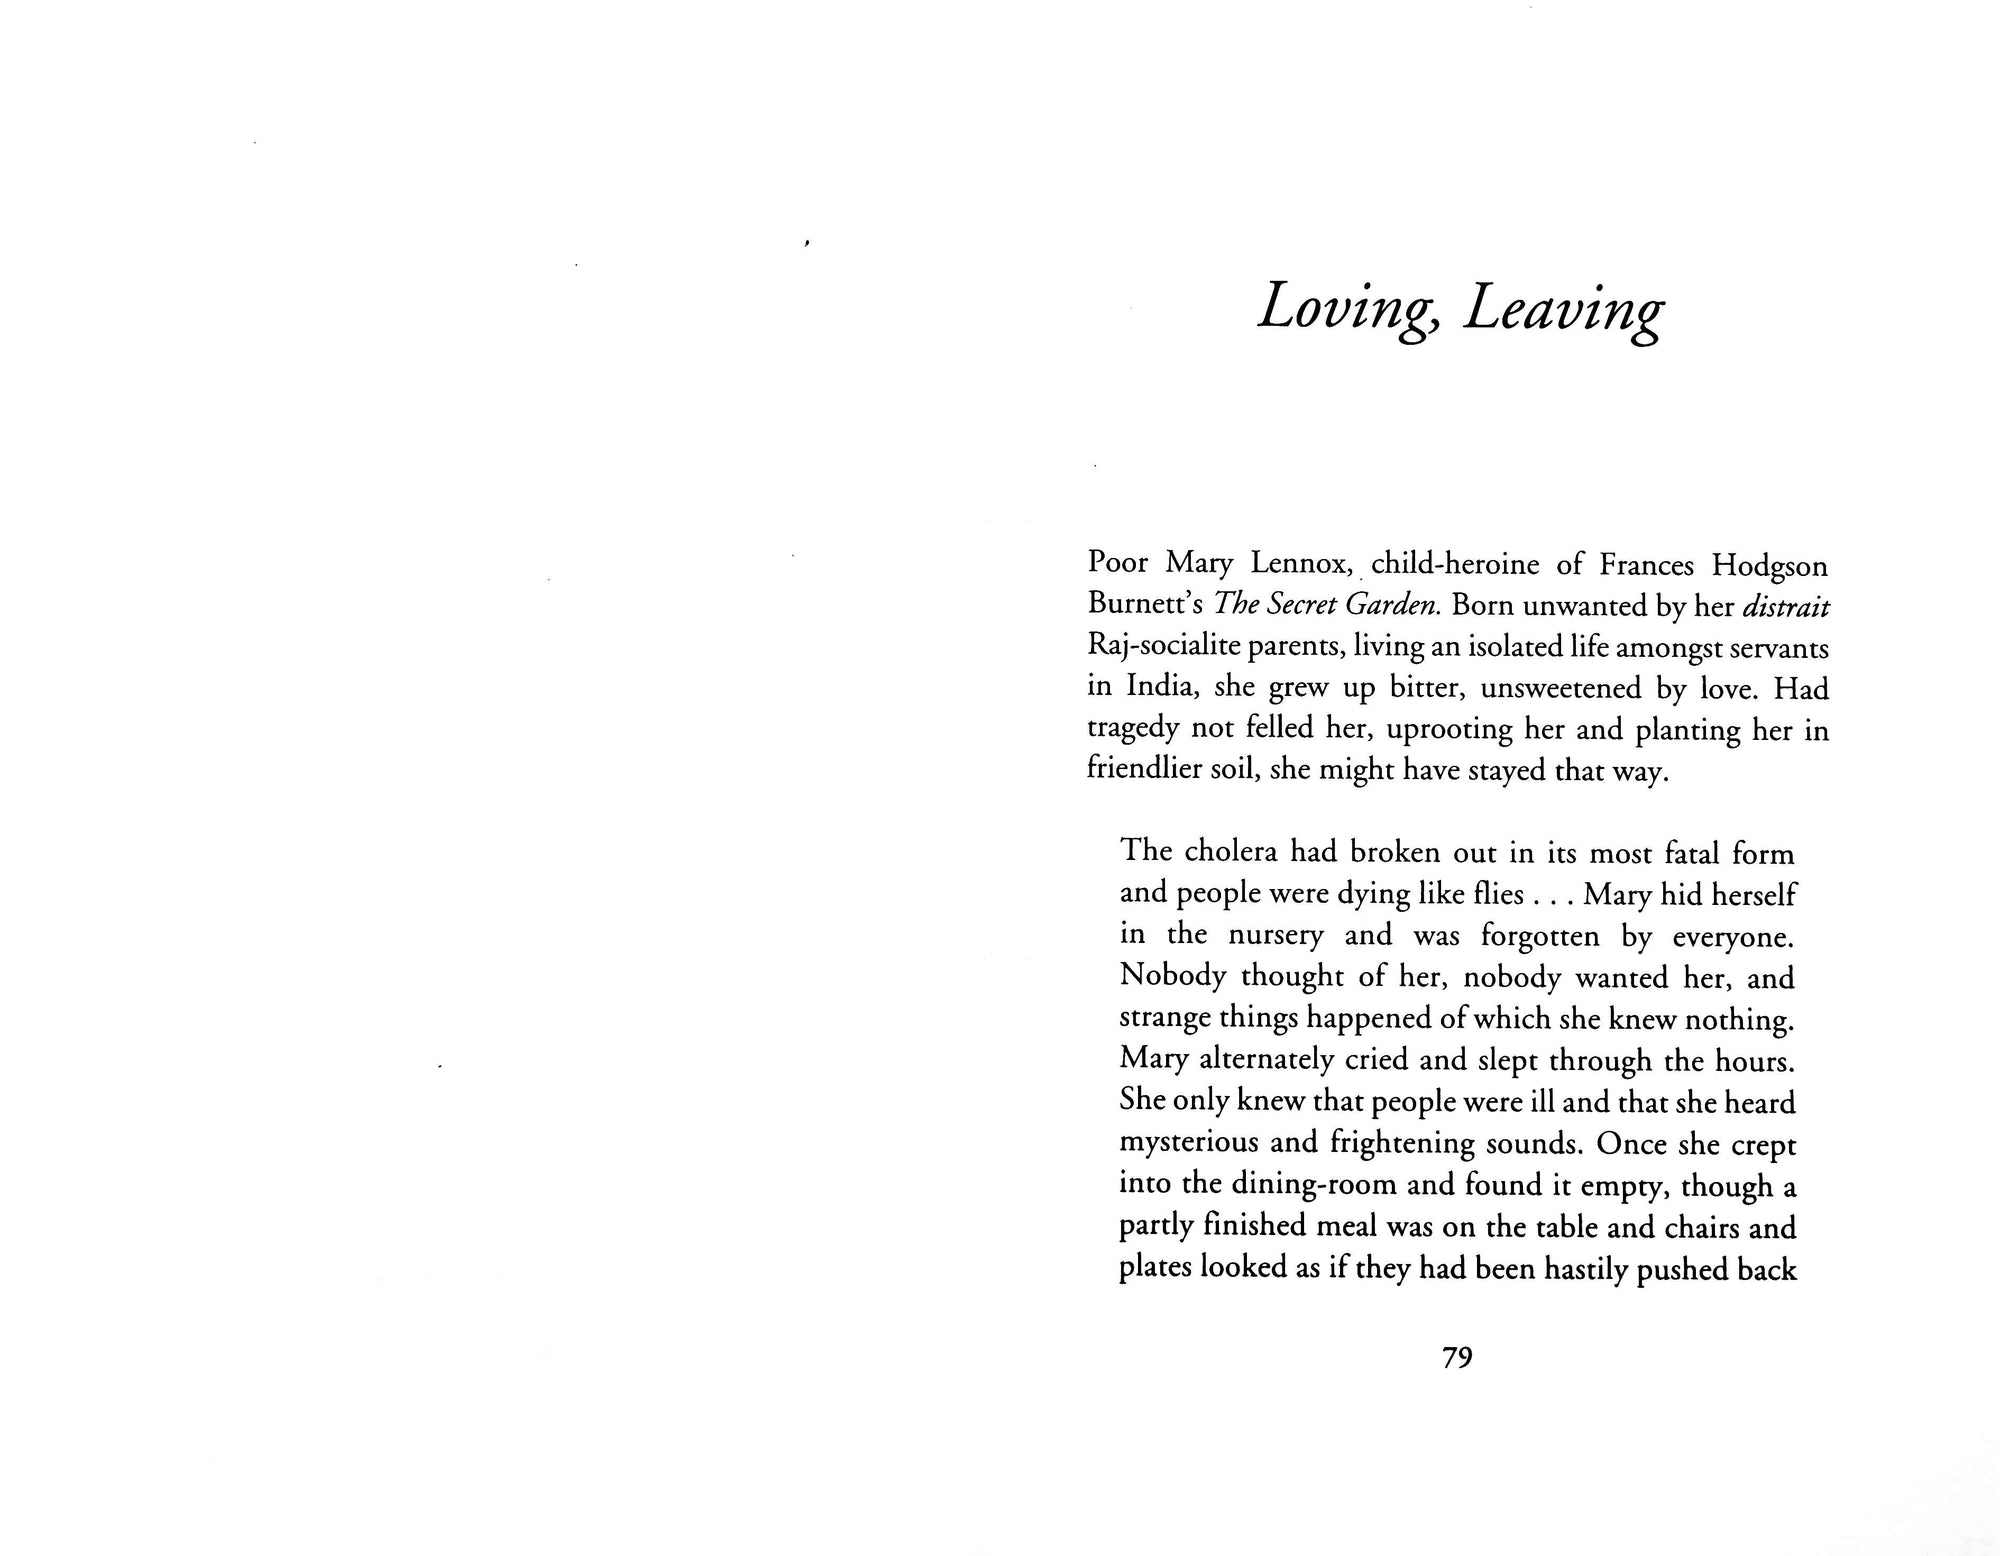 Spread of pages 78 and 79, with a chapter called 'Loving, Leaving' starting on the right page.